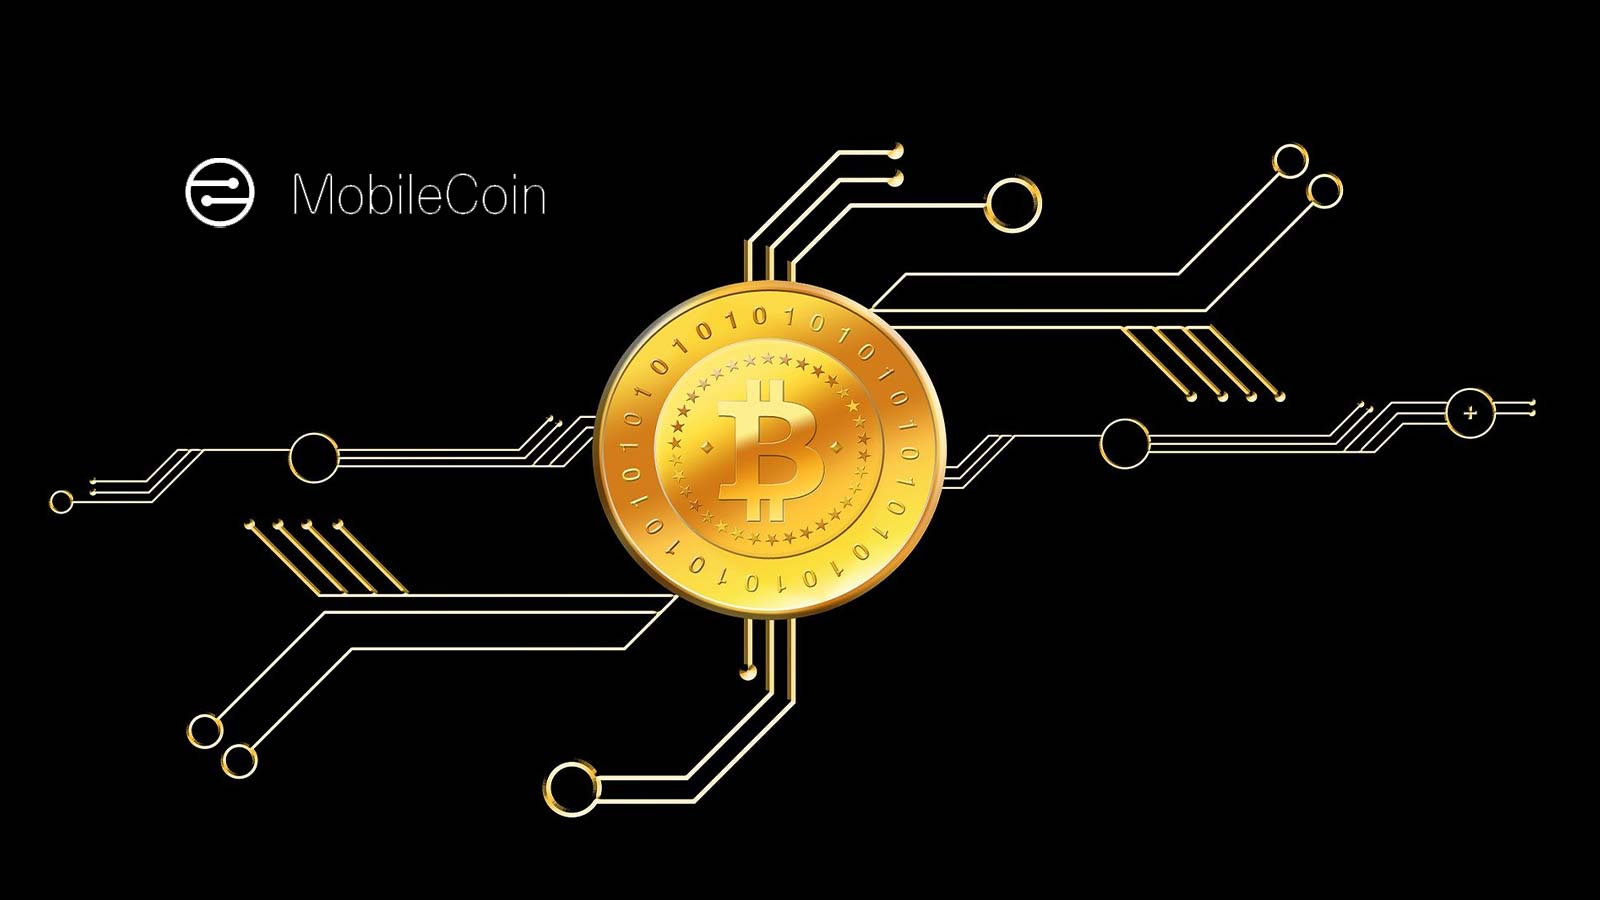 MobileCoin Announces Moby Public Launch Bringing Self-Custody and Global Peer-to-Peer Payments to the Masses